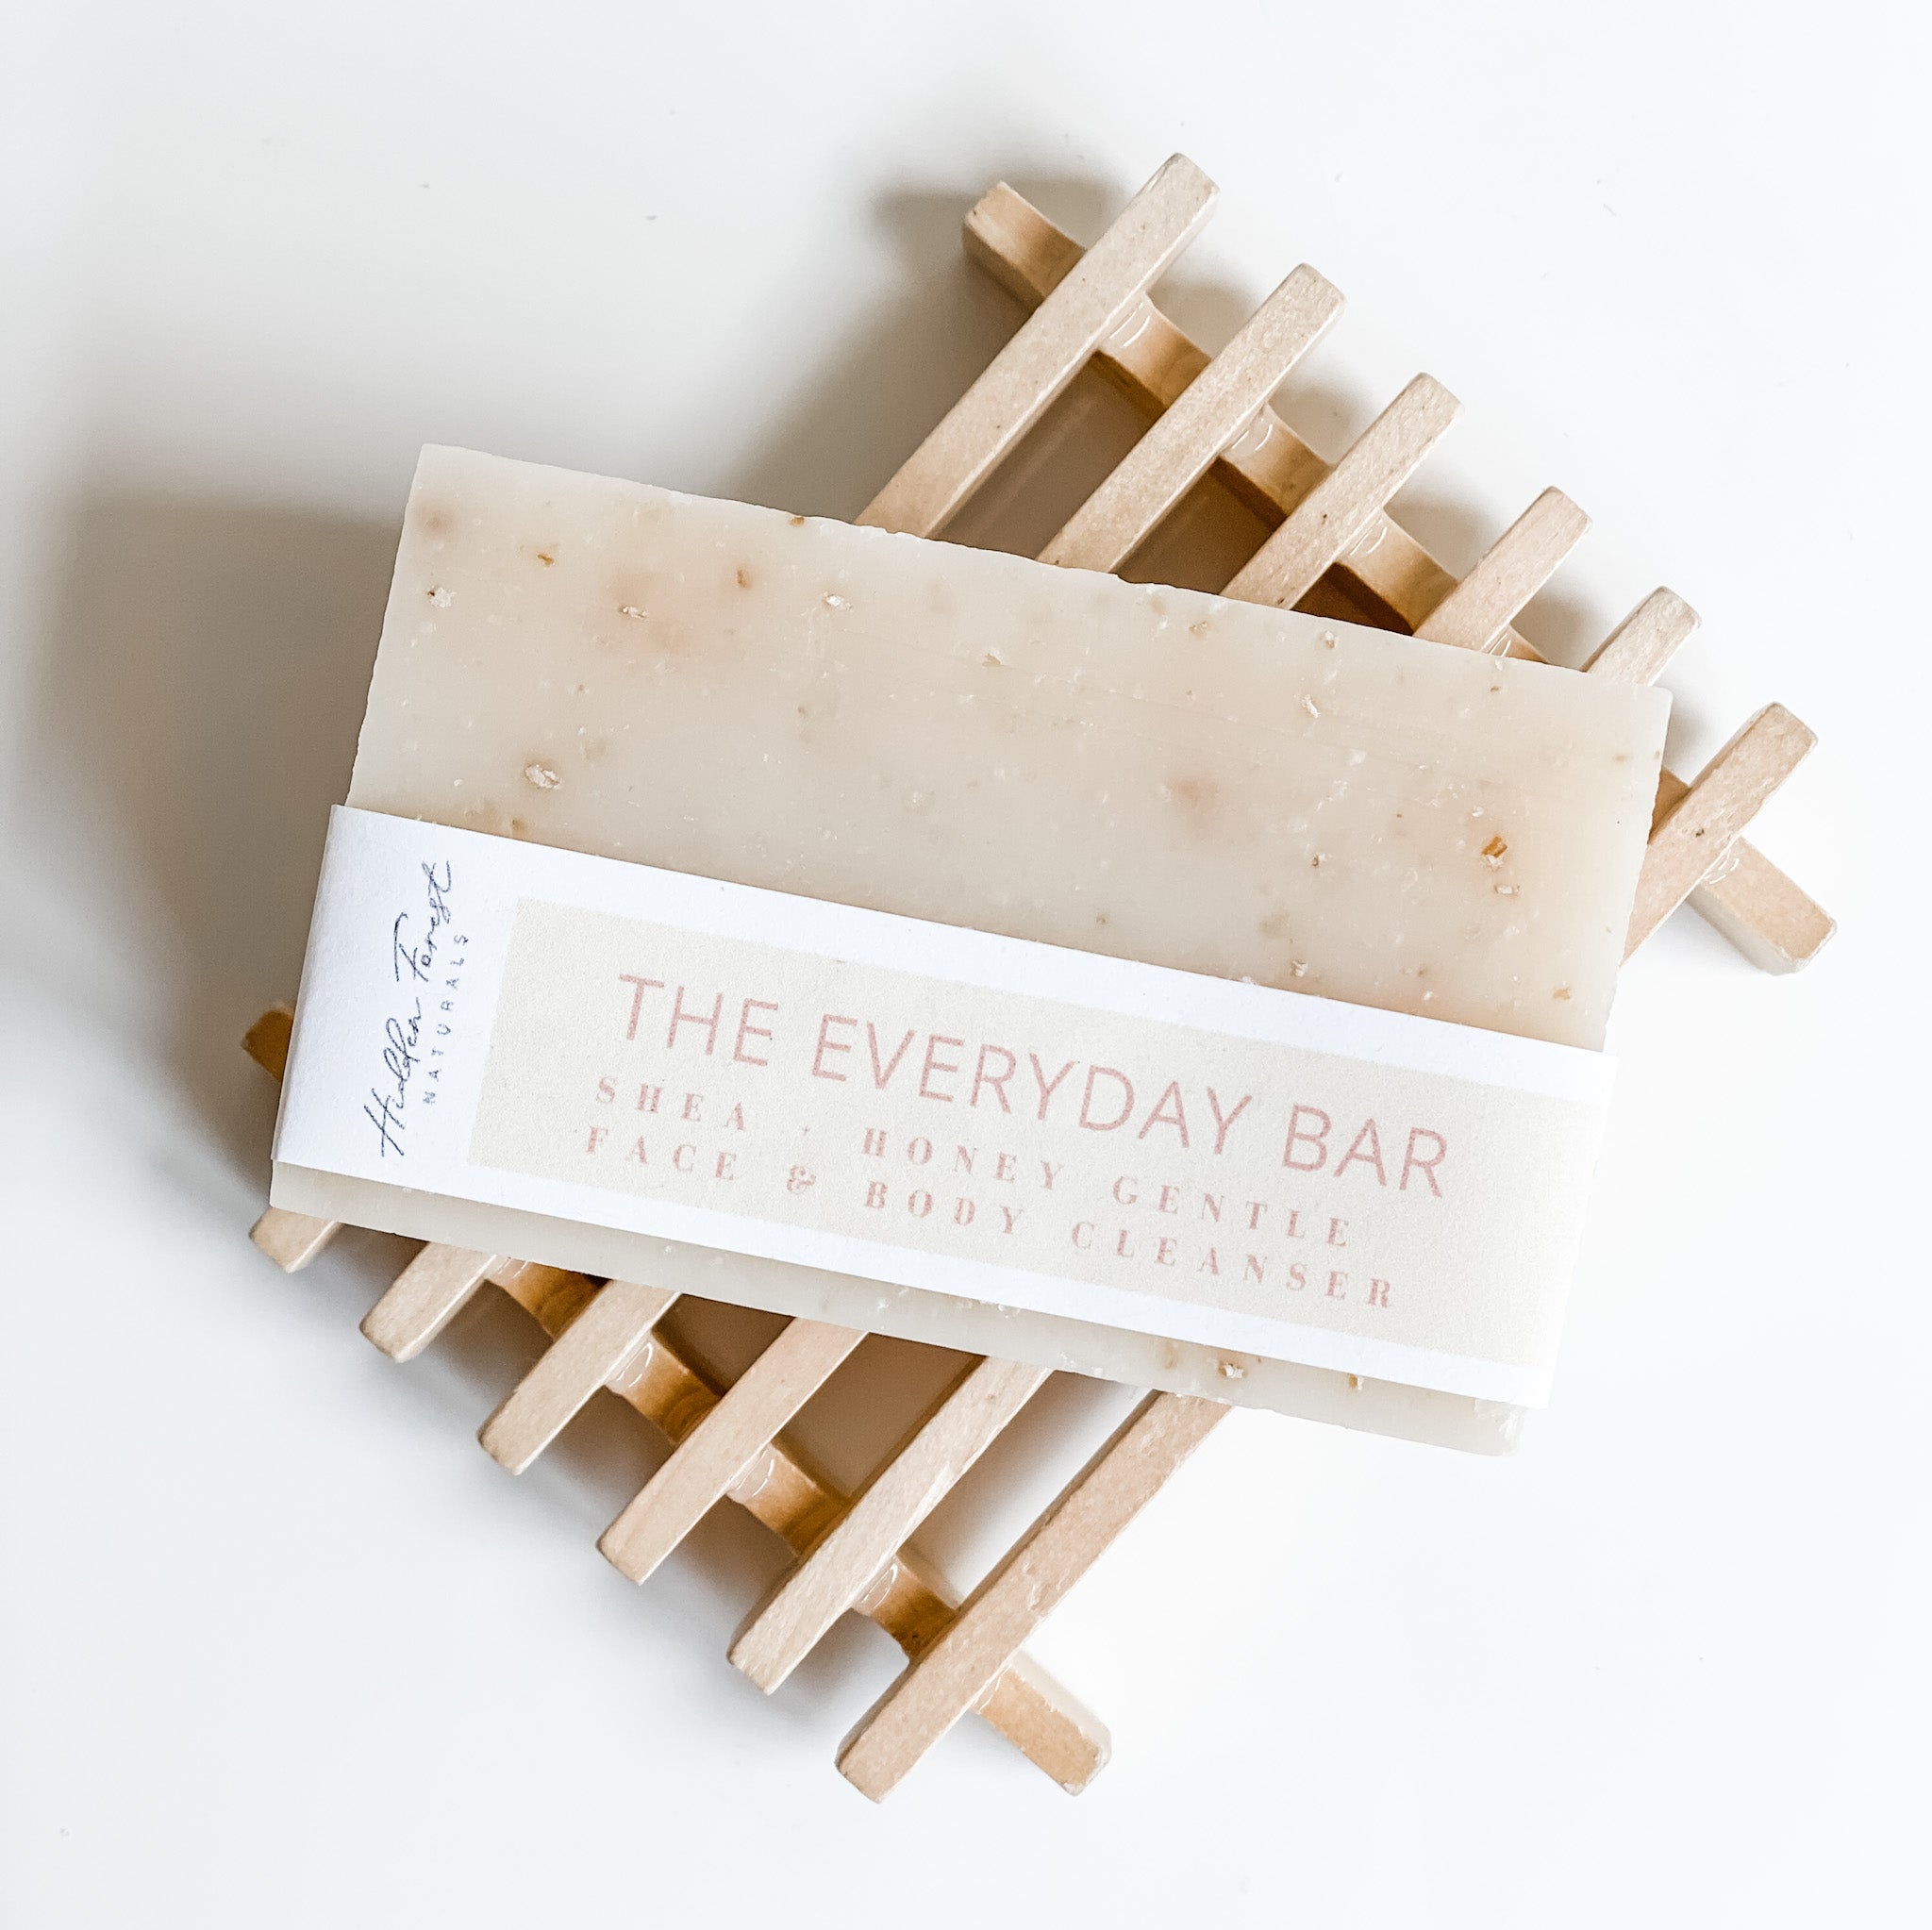 The Everyday Bar - Gentle Minimalist Multi-purpose Skin Care for Face and Body - Handmade with Natural Ingredients. Hidden Forest Naturals